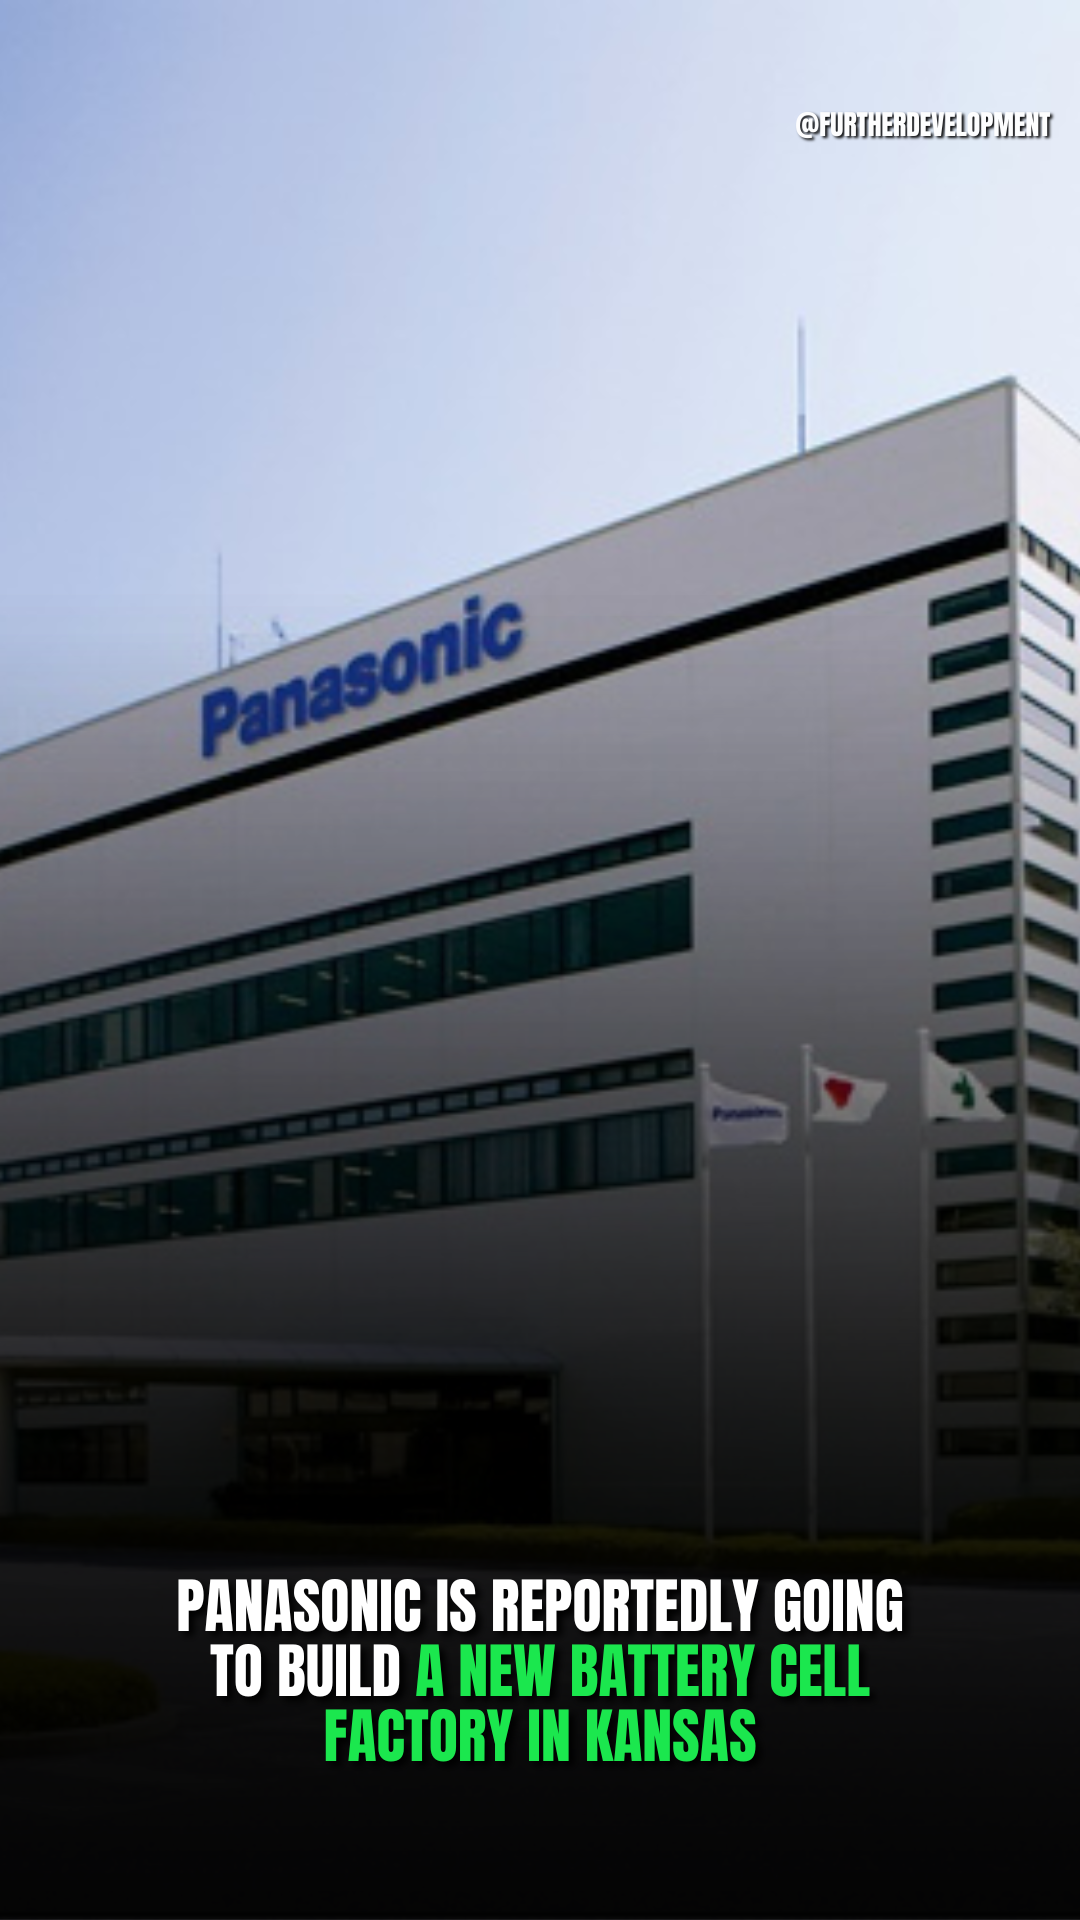 Panasonic is reportedly going to build a new battery cell factory in Kansas